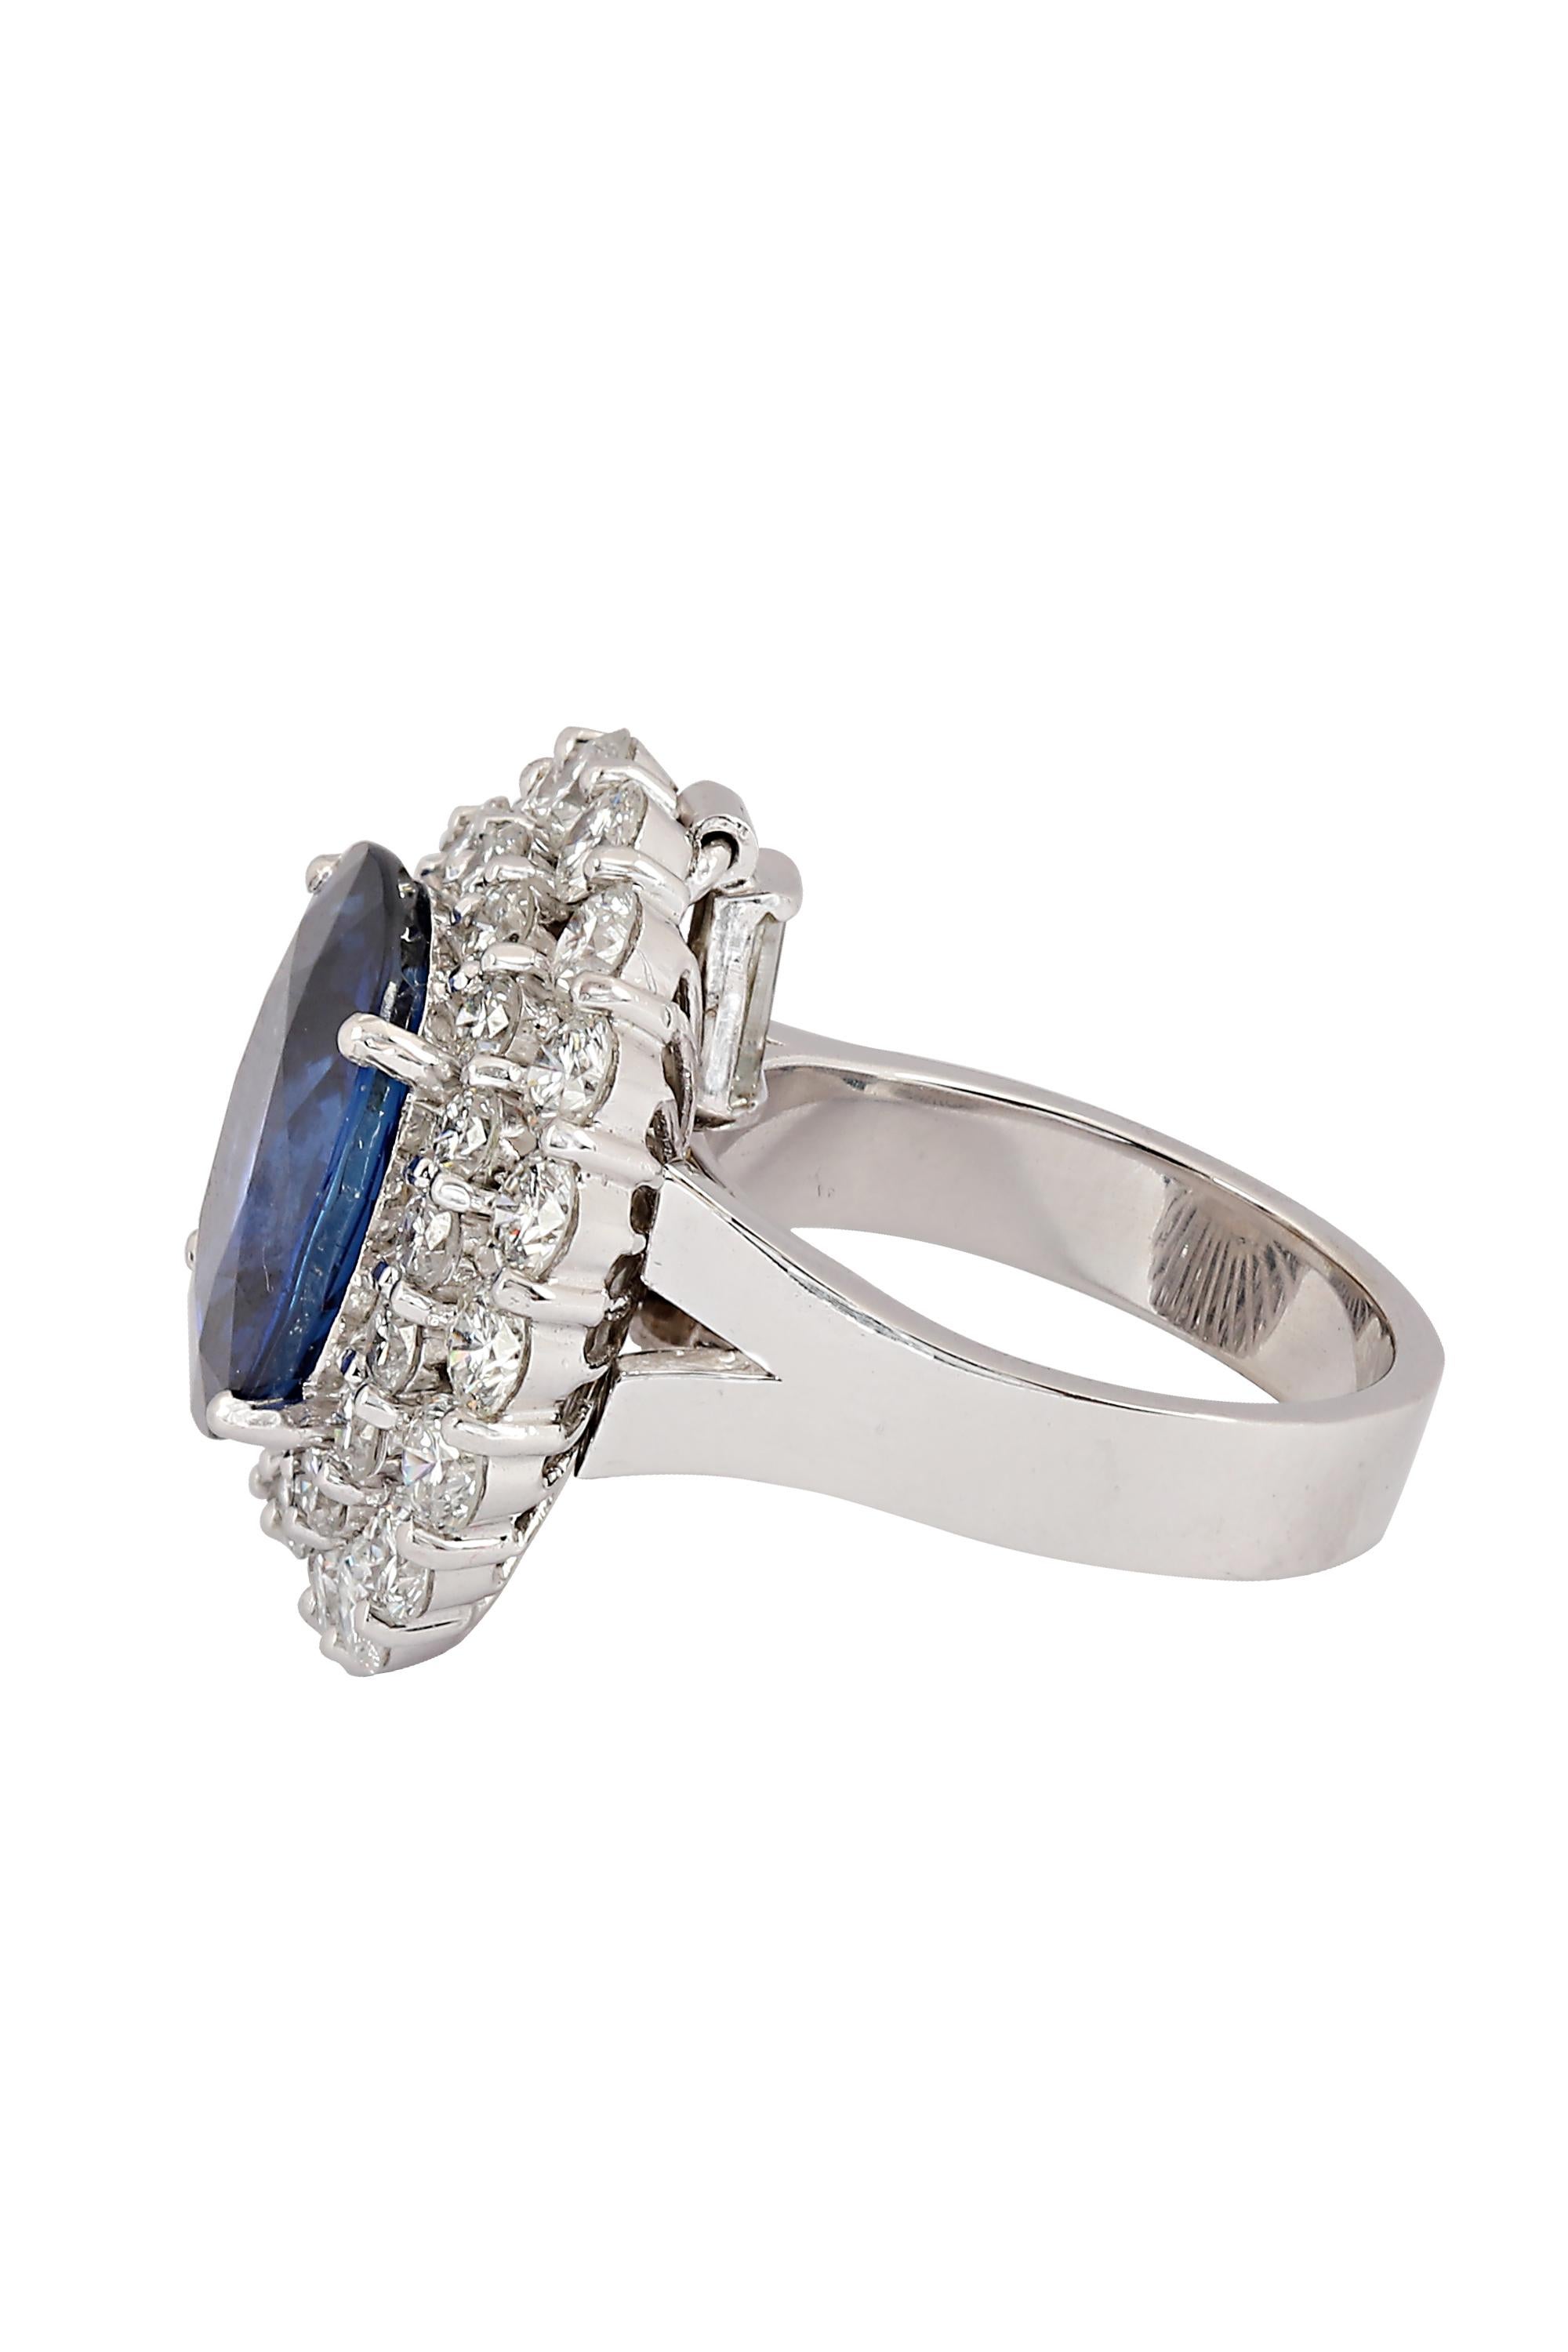 Art Deco GIA Certified 9.43 Carat Sapphire and Diamond Convertible Ring and Pendant